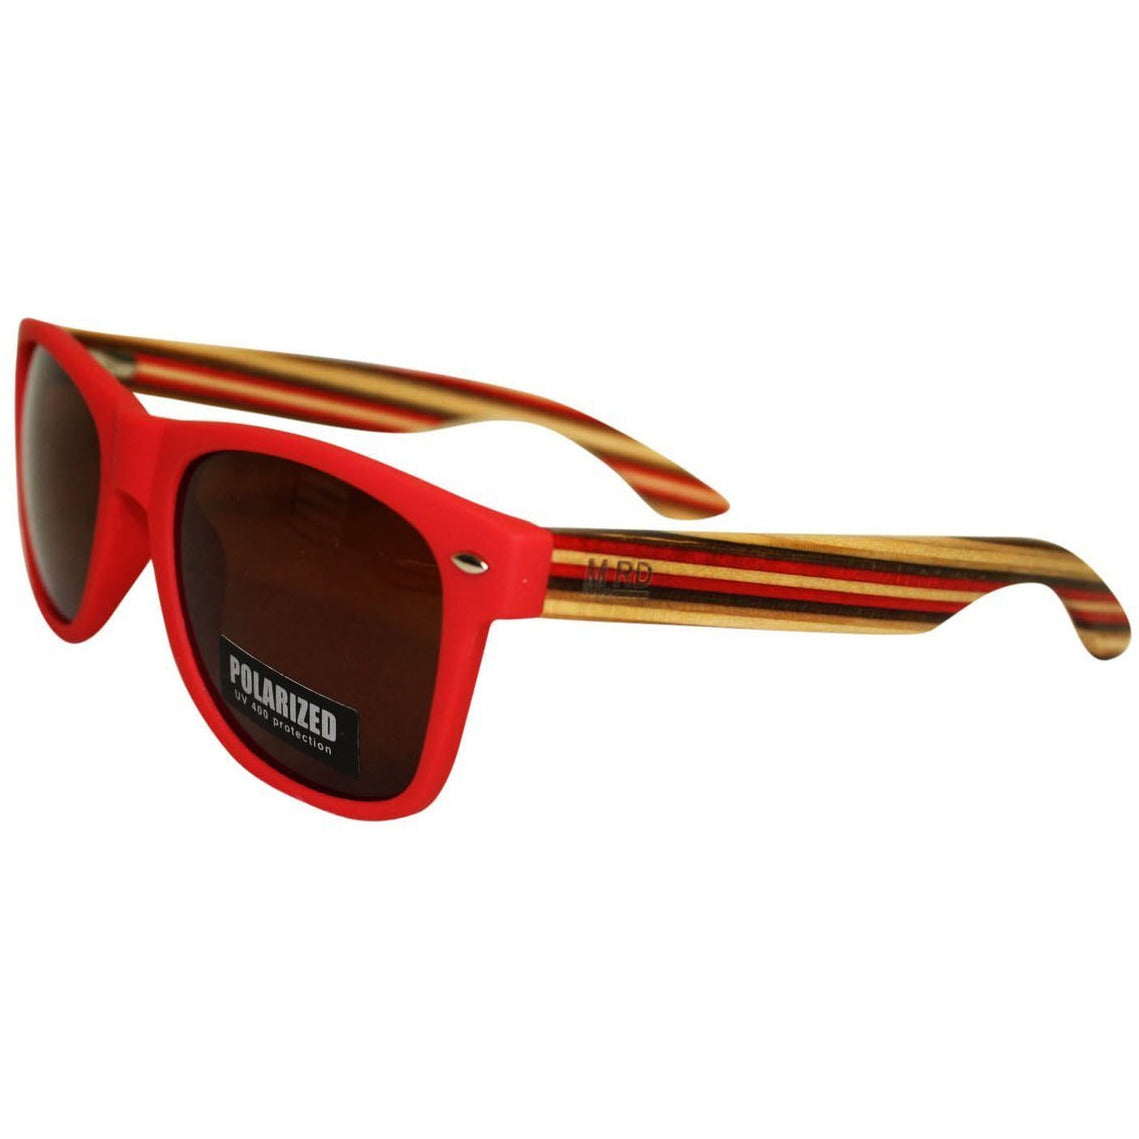 Wooden Sunnies - Matte Red w Striped Arms | Moana Rd Moana Road